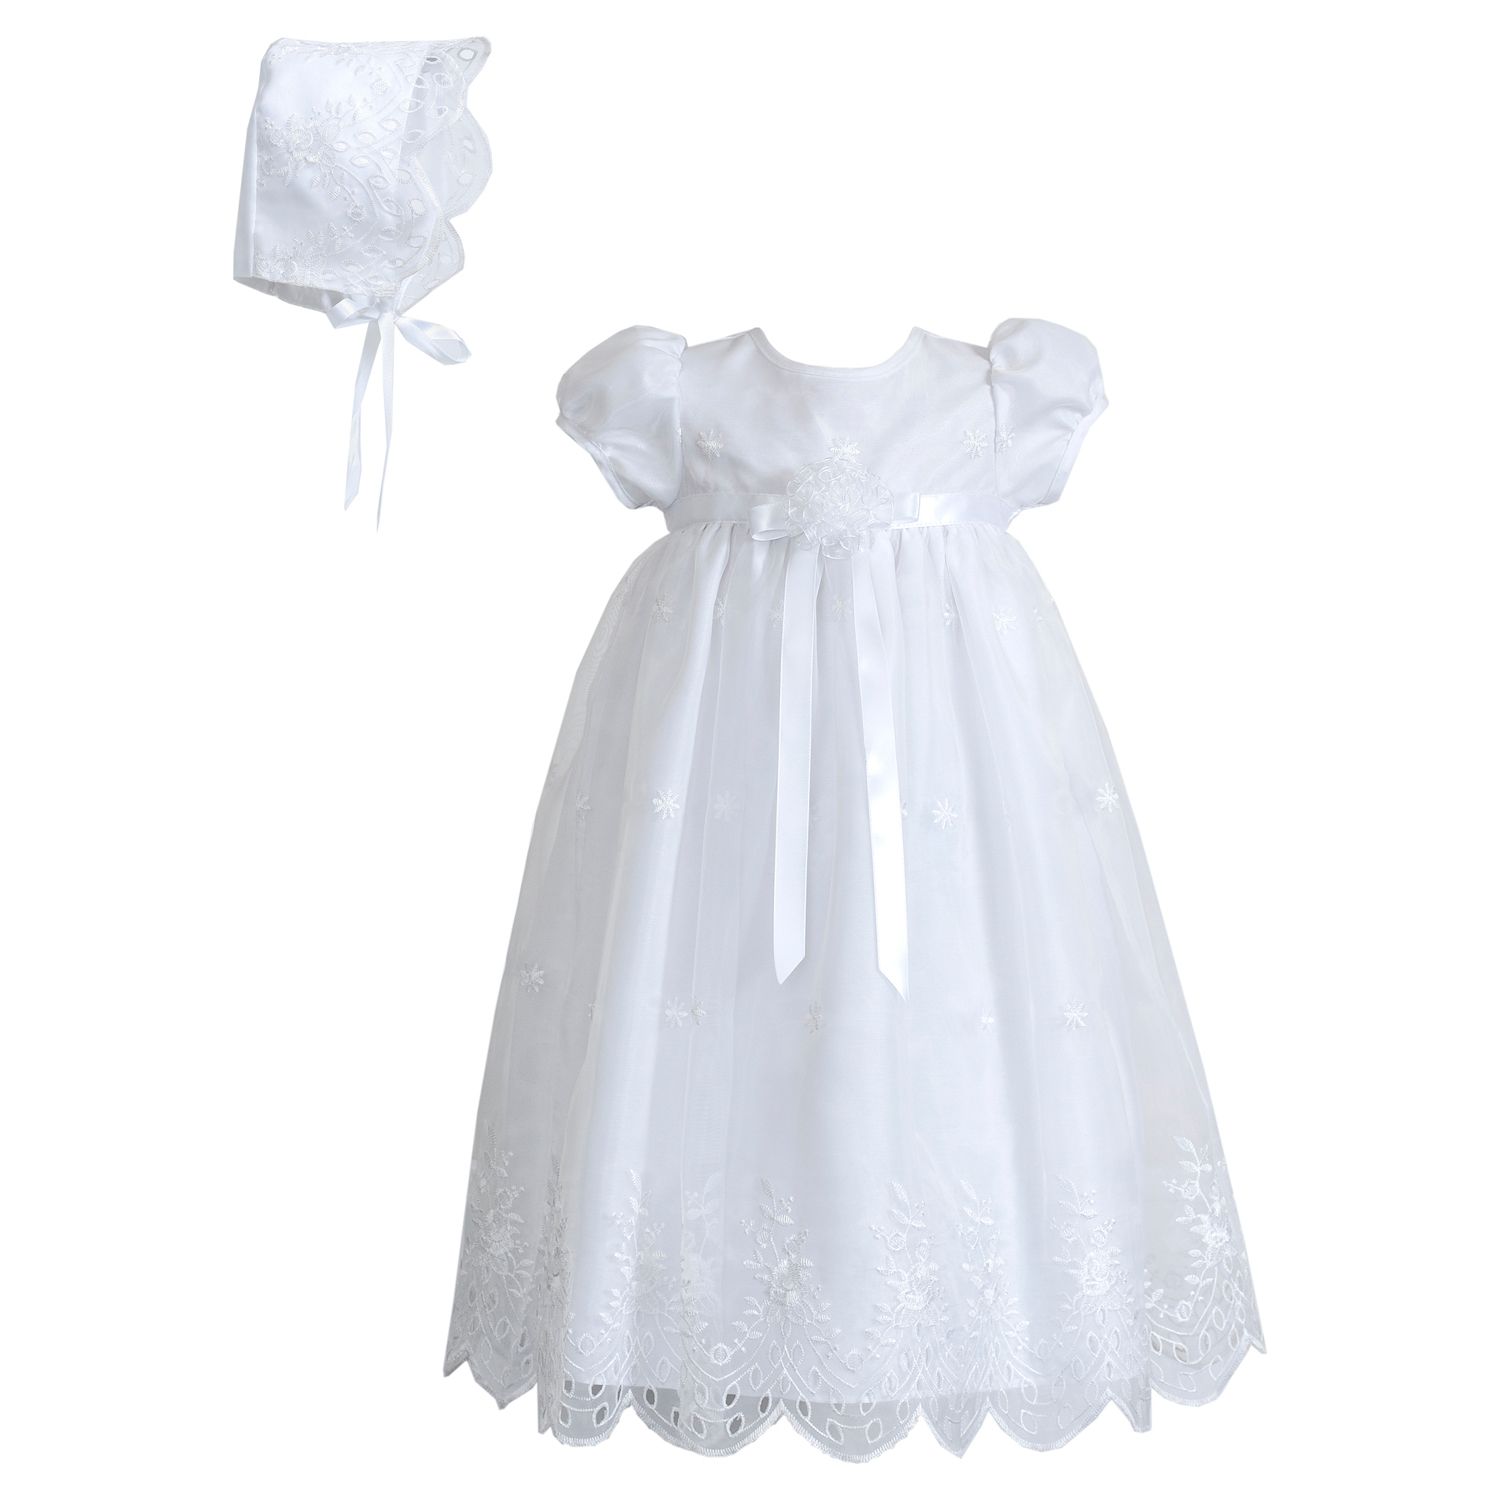 kohl's baby christening outfits